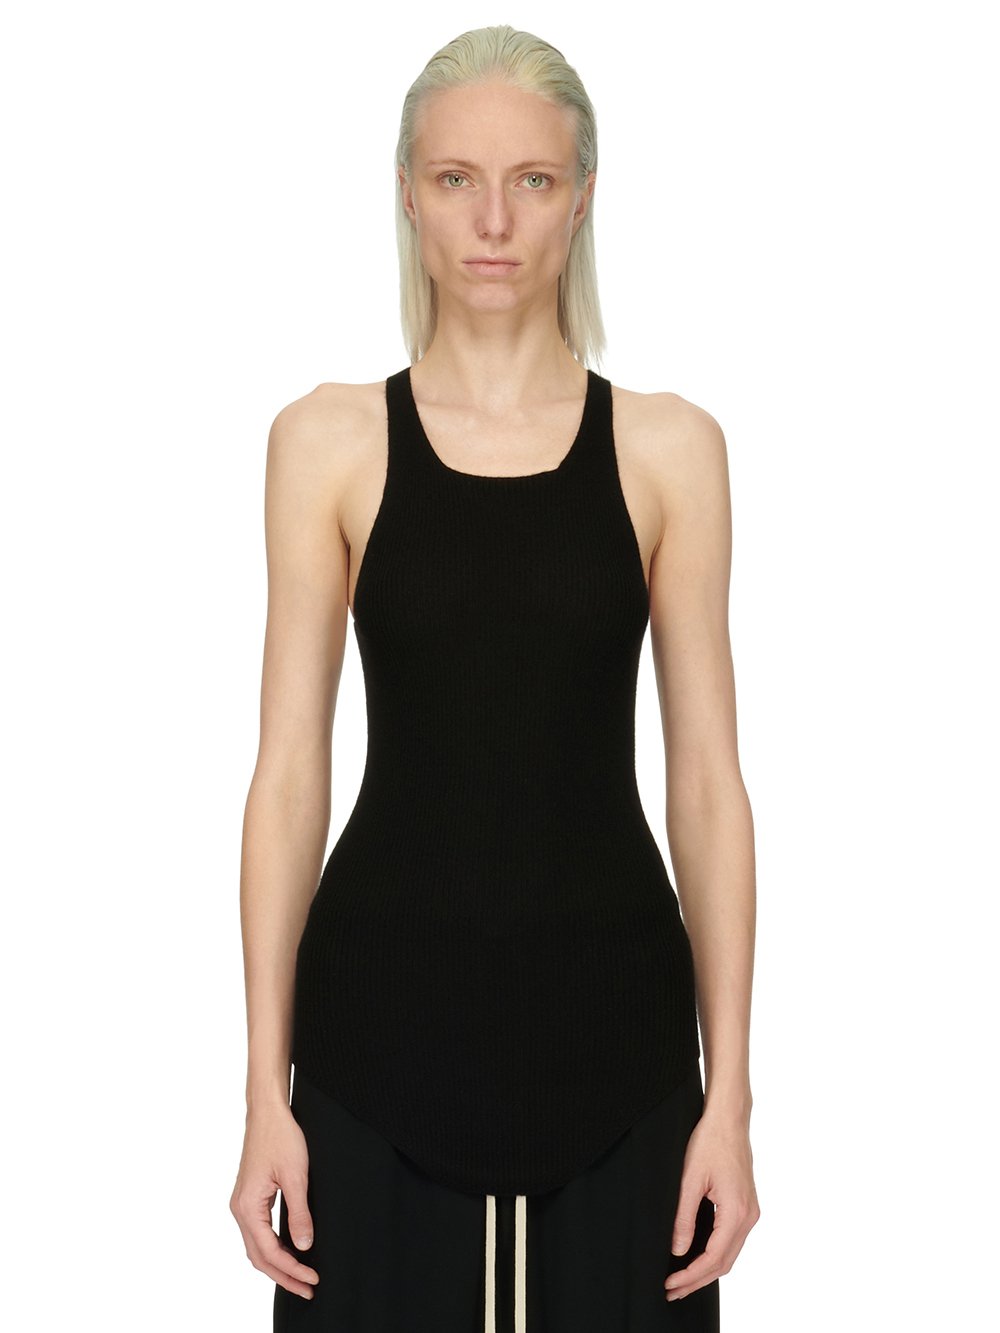 RICK OWENS FOREVER RIB TANK TOP IN BLACK BOILED CASHMERE.